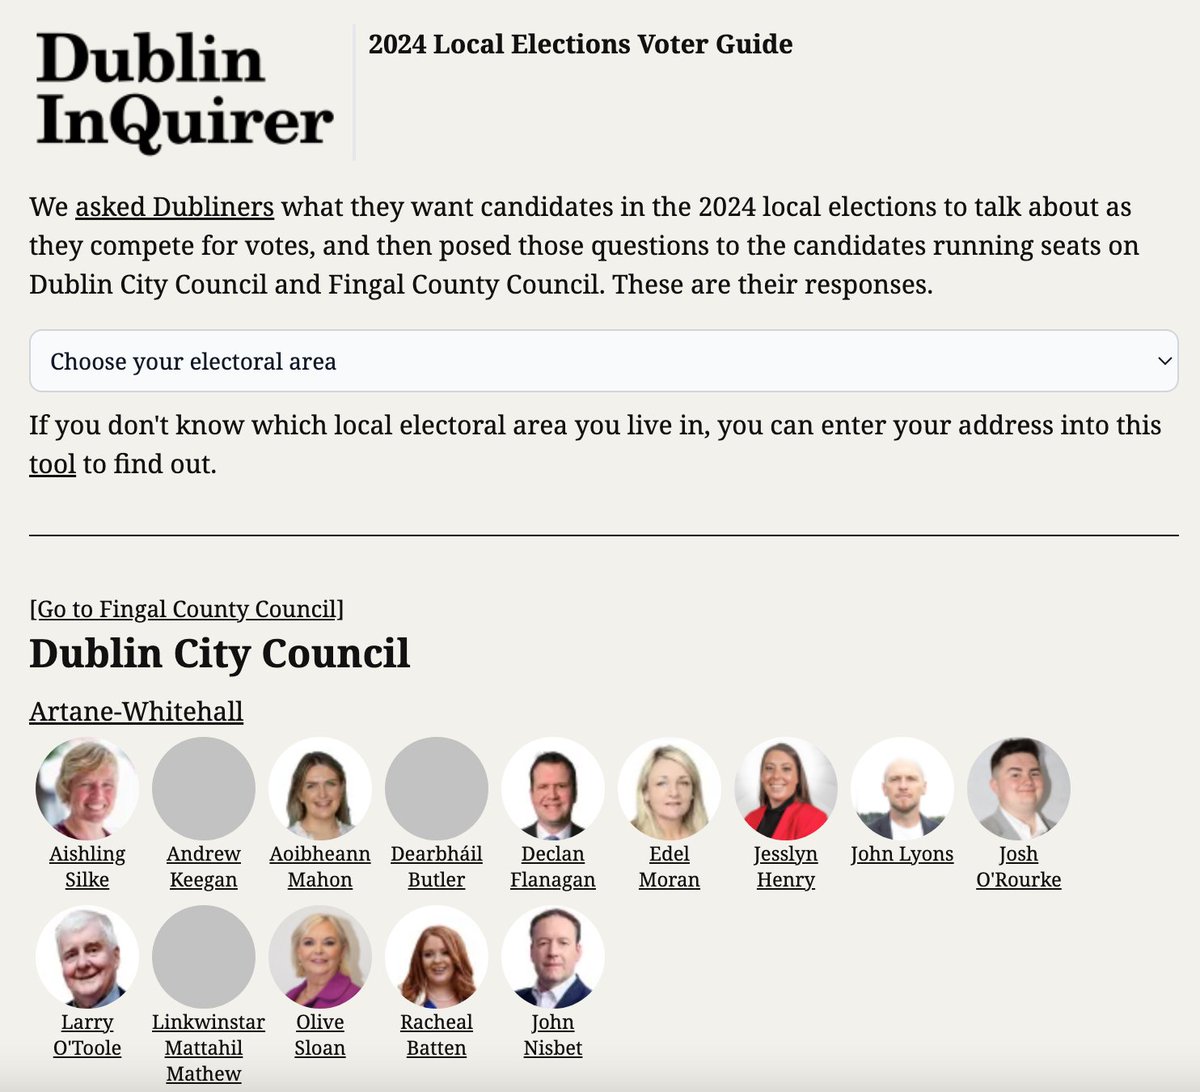 This is another brilliant (and free) resource from @DublinInquirer. Want to know who your candidates are for the upcoming local elections? Their priorities & plans for housing, transport etc? They're all here and sortable by DCC & Fingal districts. Great work @samtranum & co 👏🗳️